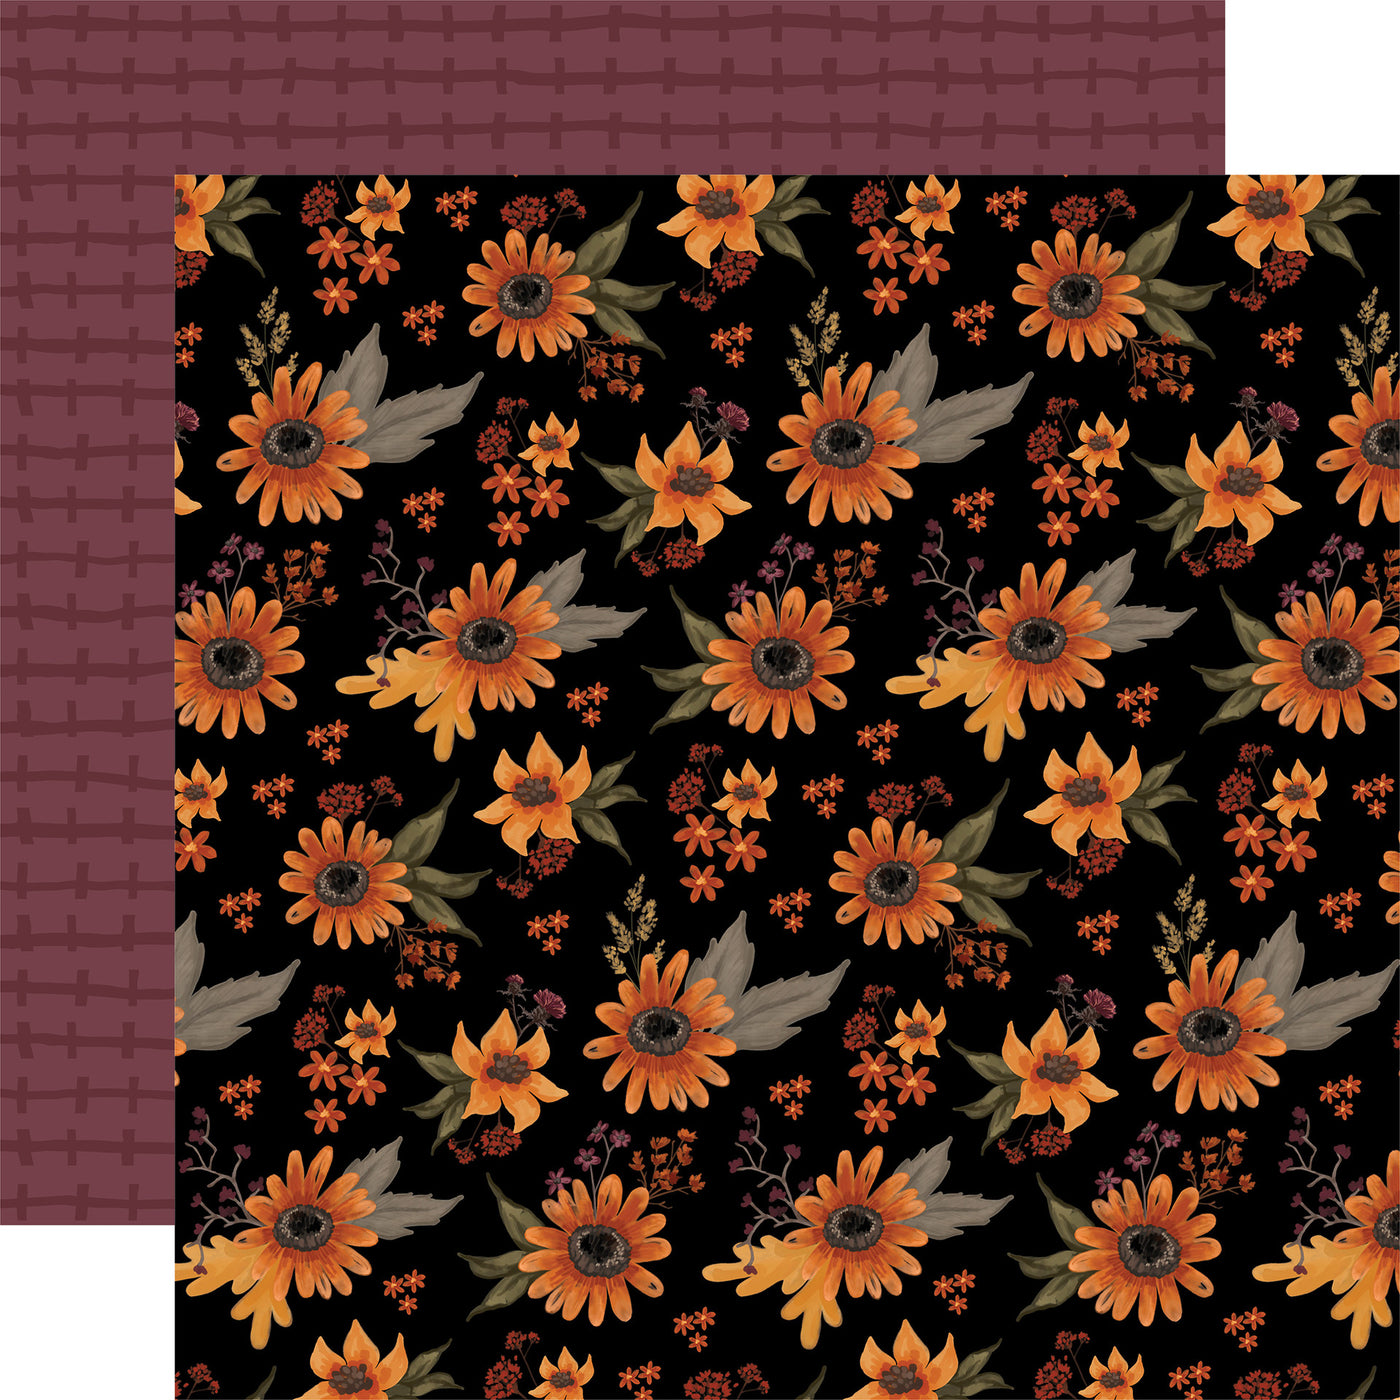 Double-sided 12x12 cardstock. (Side A - sunflowers and other florals on a black background, and Side B - dark plum line pattern on a plum background) Acid-free